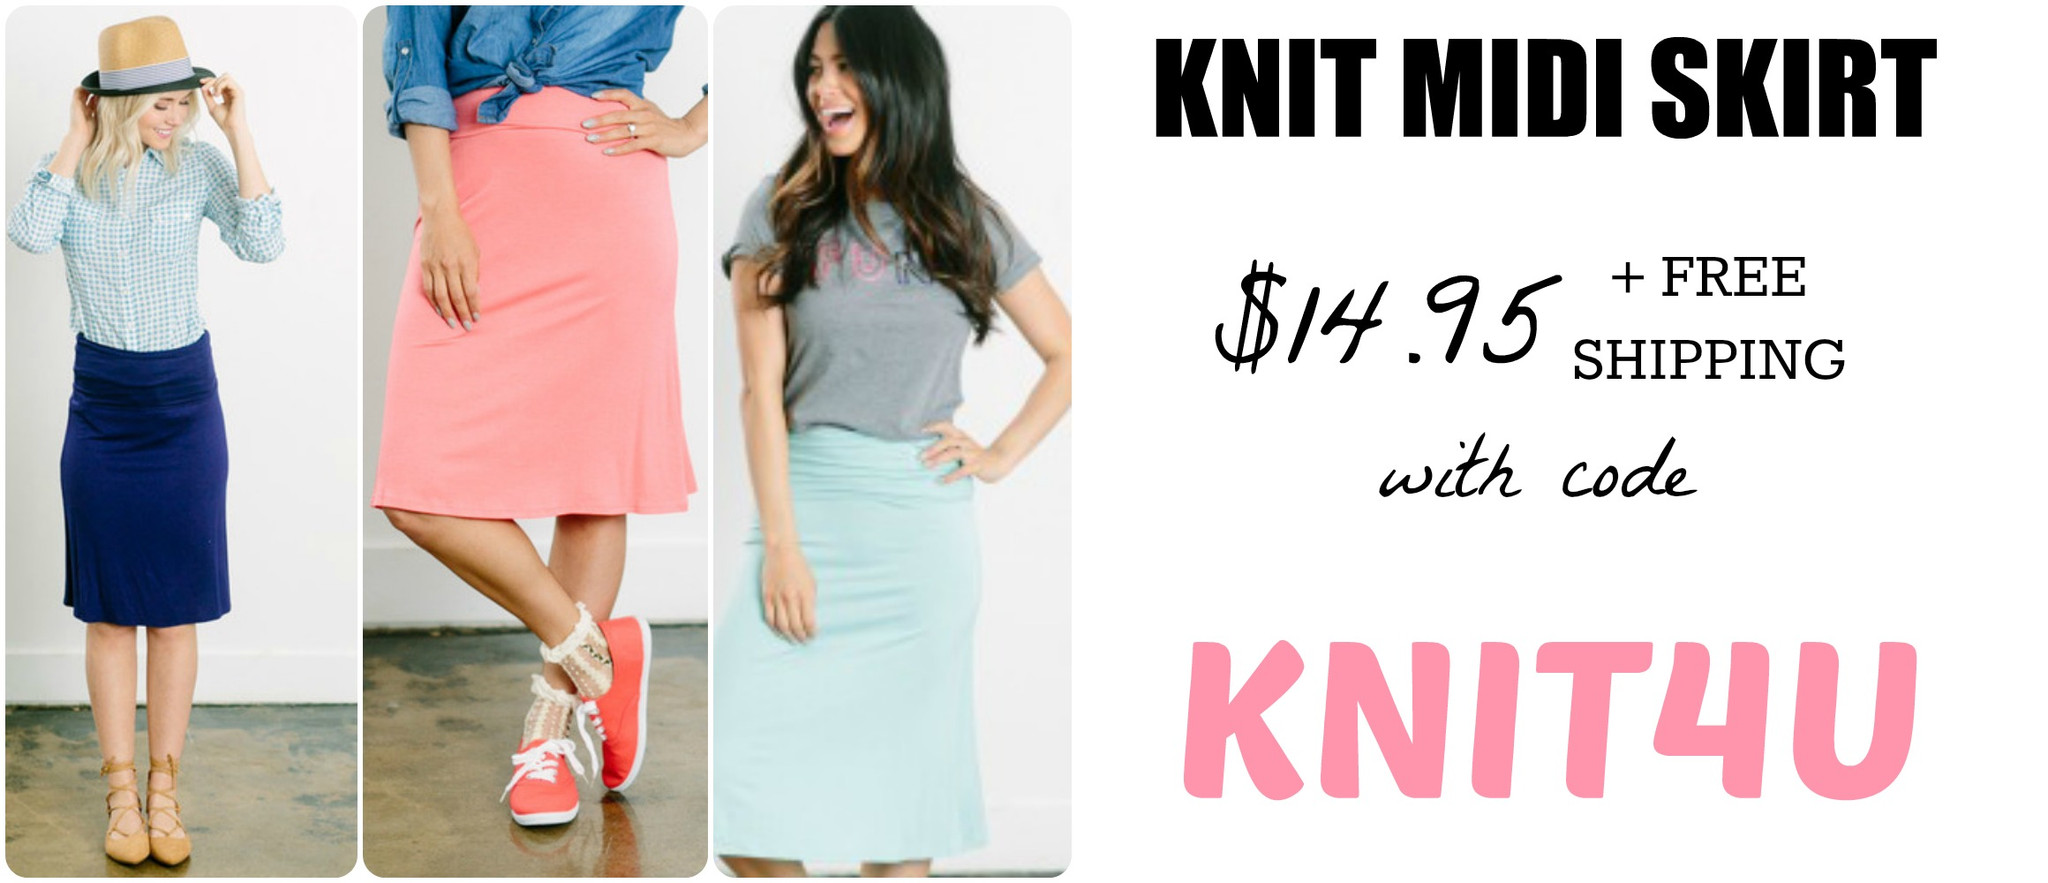 Cute and Comfy Knit Midi Skirt Only $14.95 Shipped!